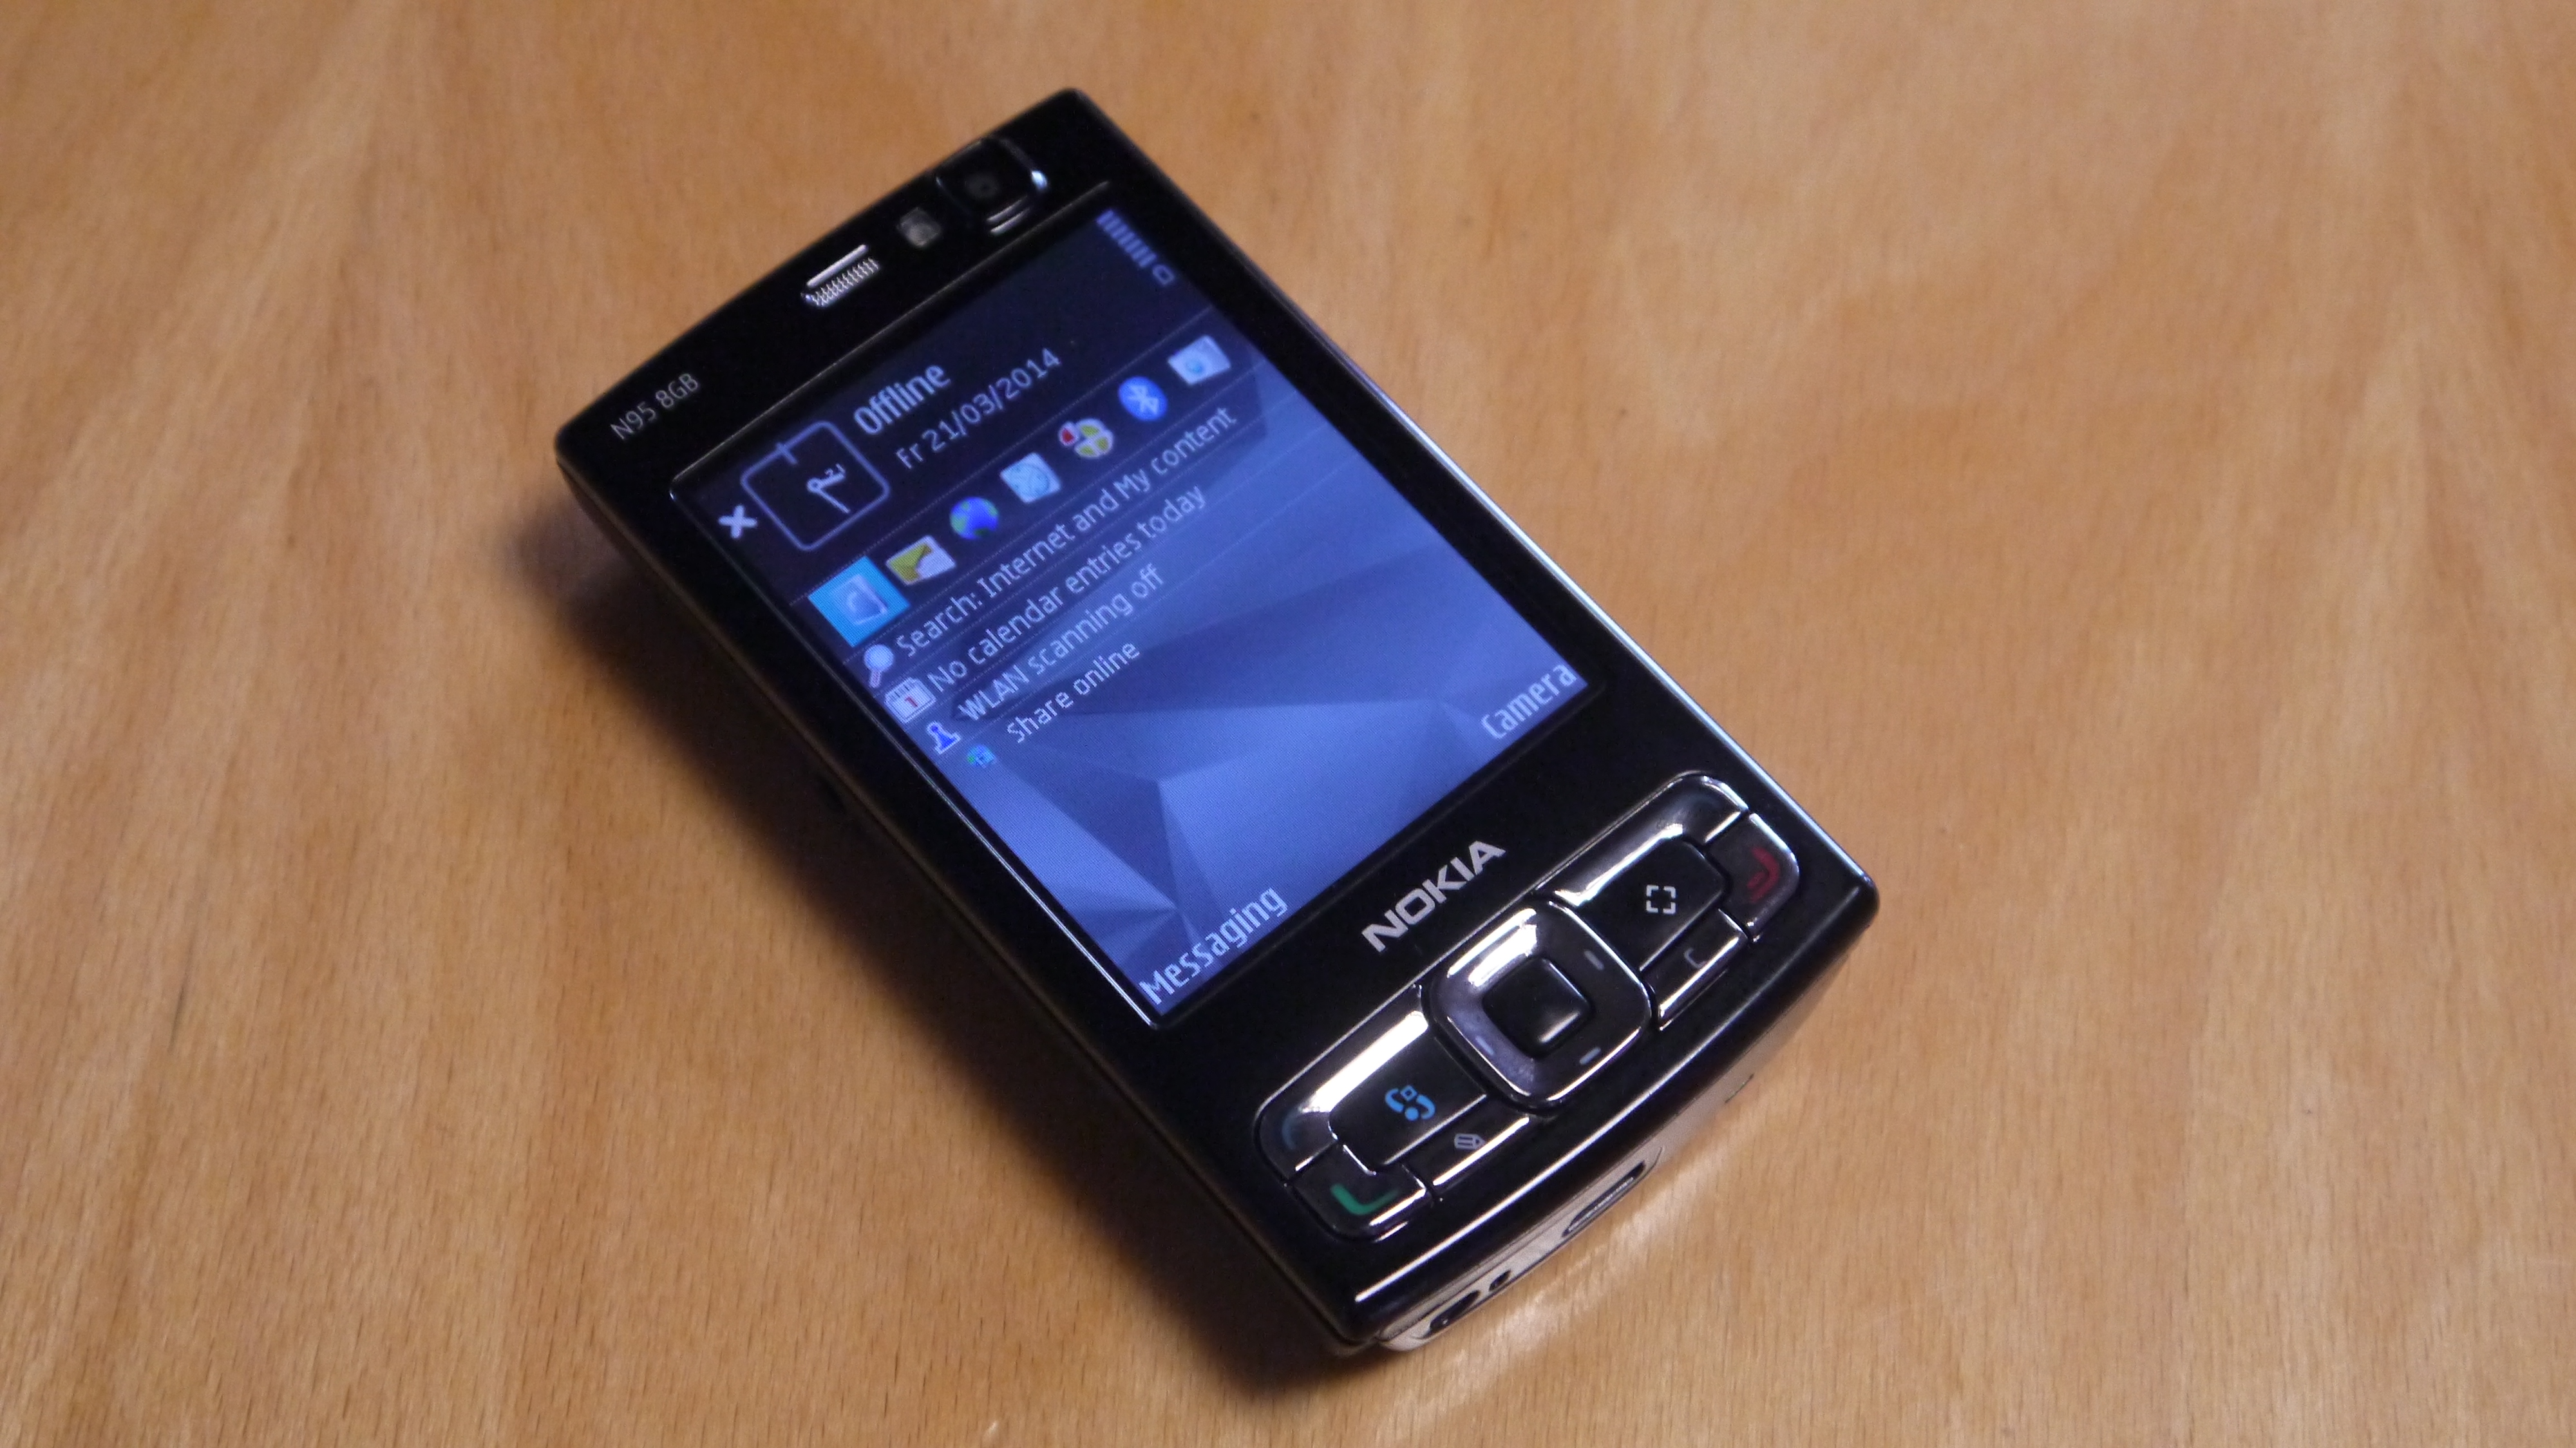 N95: the brilliant smartphone that almost brought Nokia to knees | TechRadar